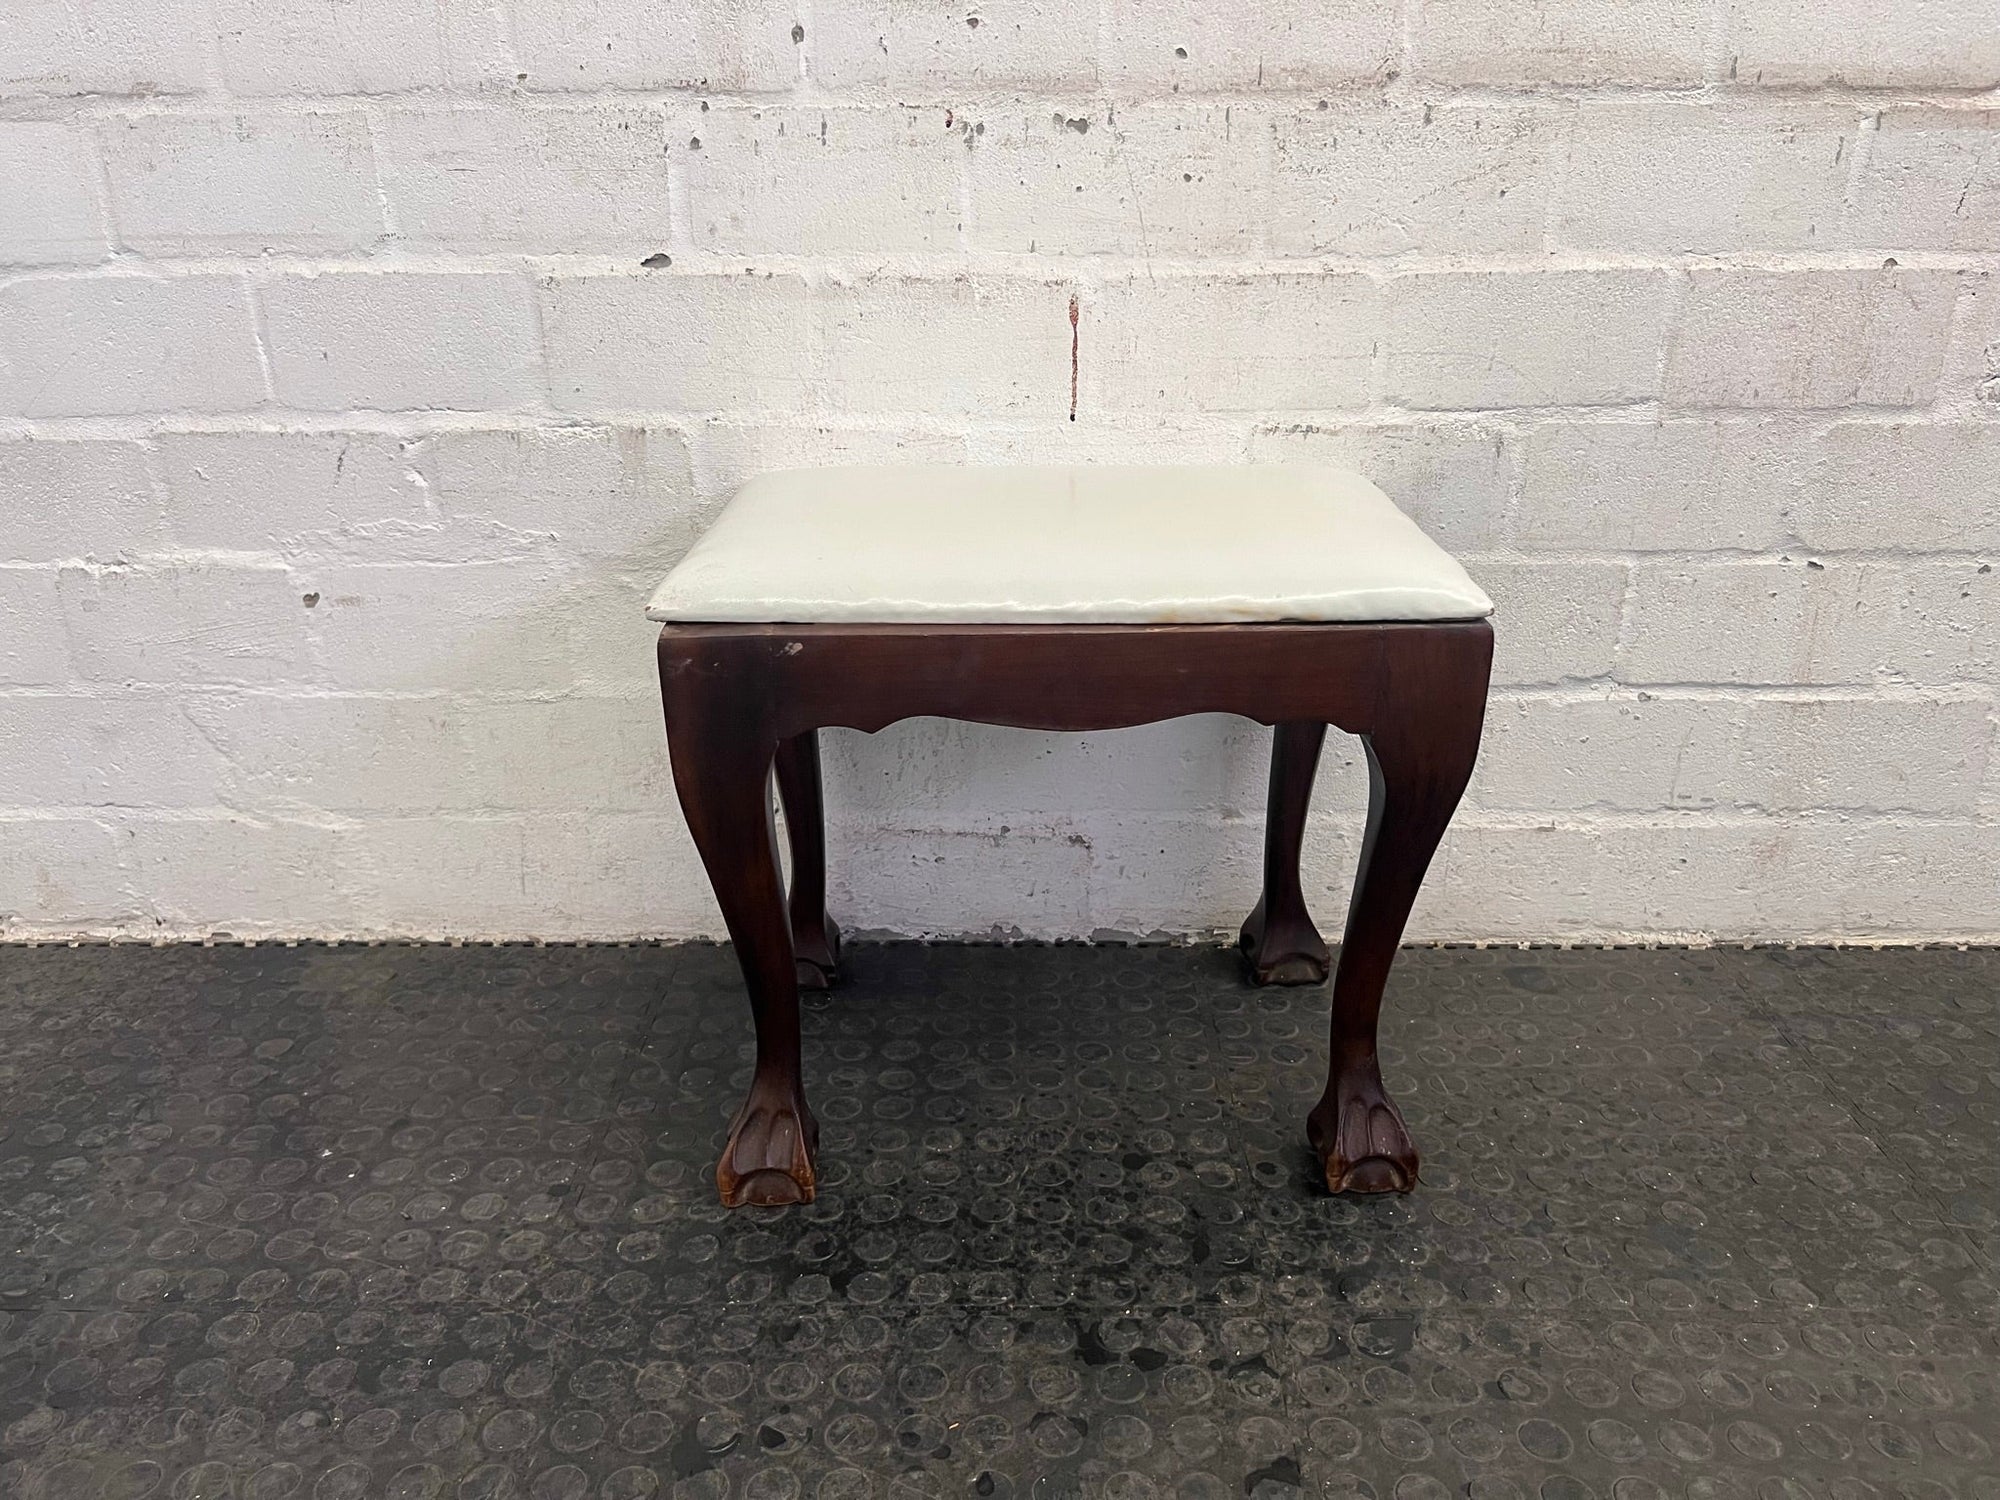 Ball and Claw Dressing Table Stool with White Cushion - REDUCED